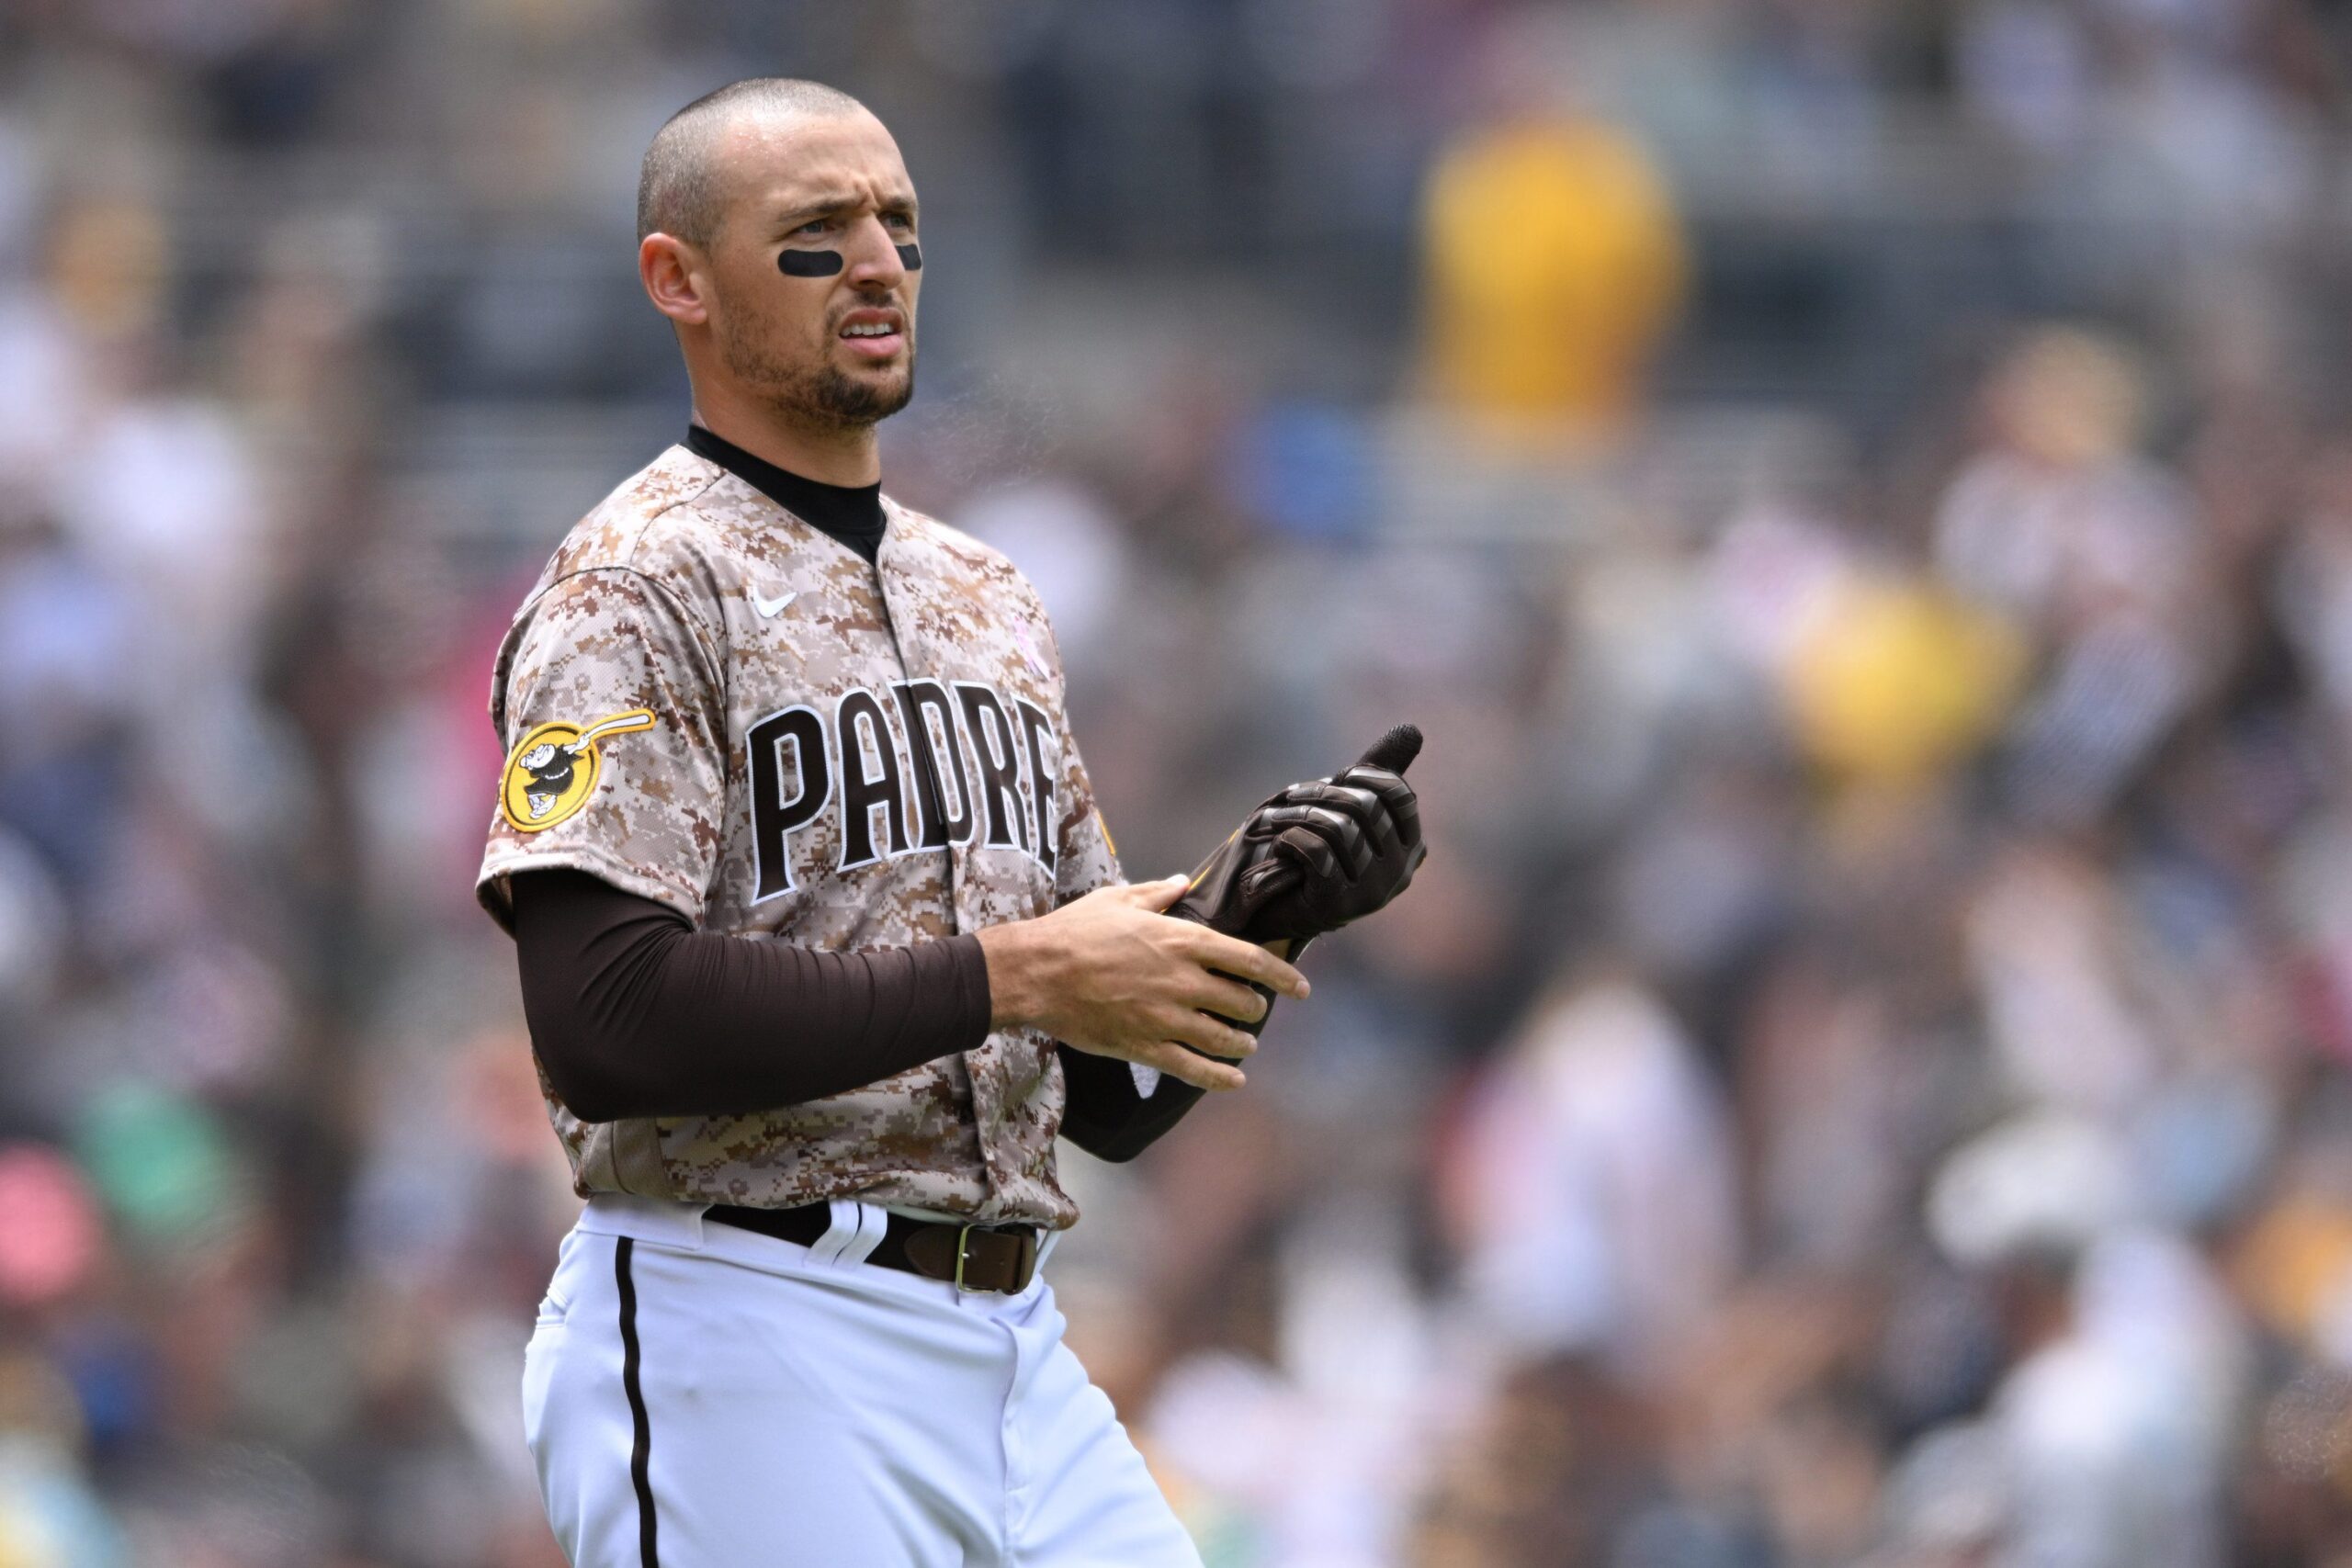 San Diego Padres right fielder Trayce Thompson looks on after striking out to end